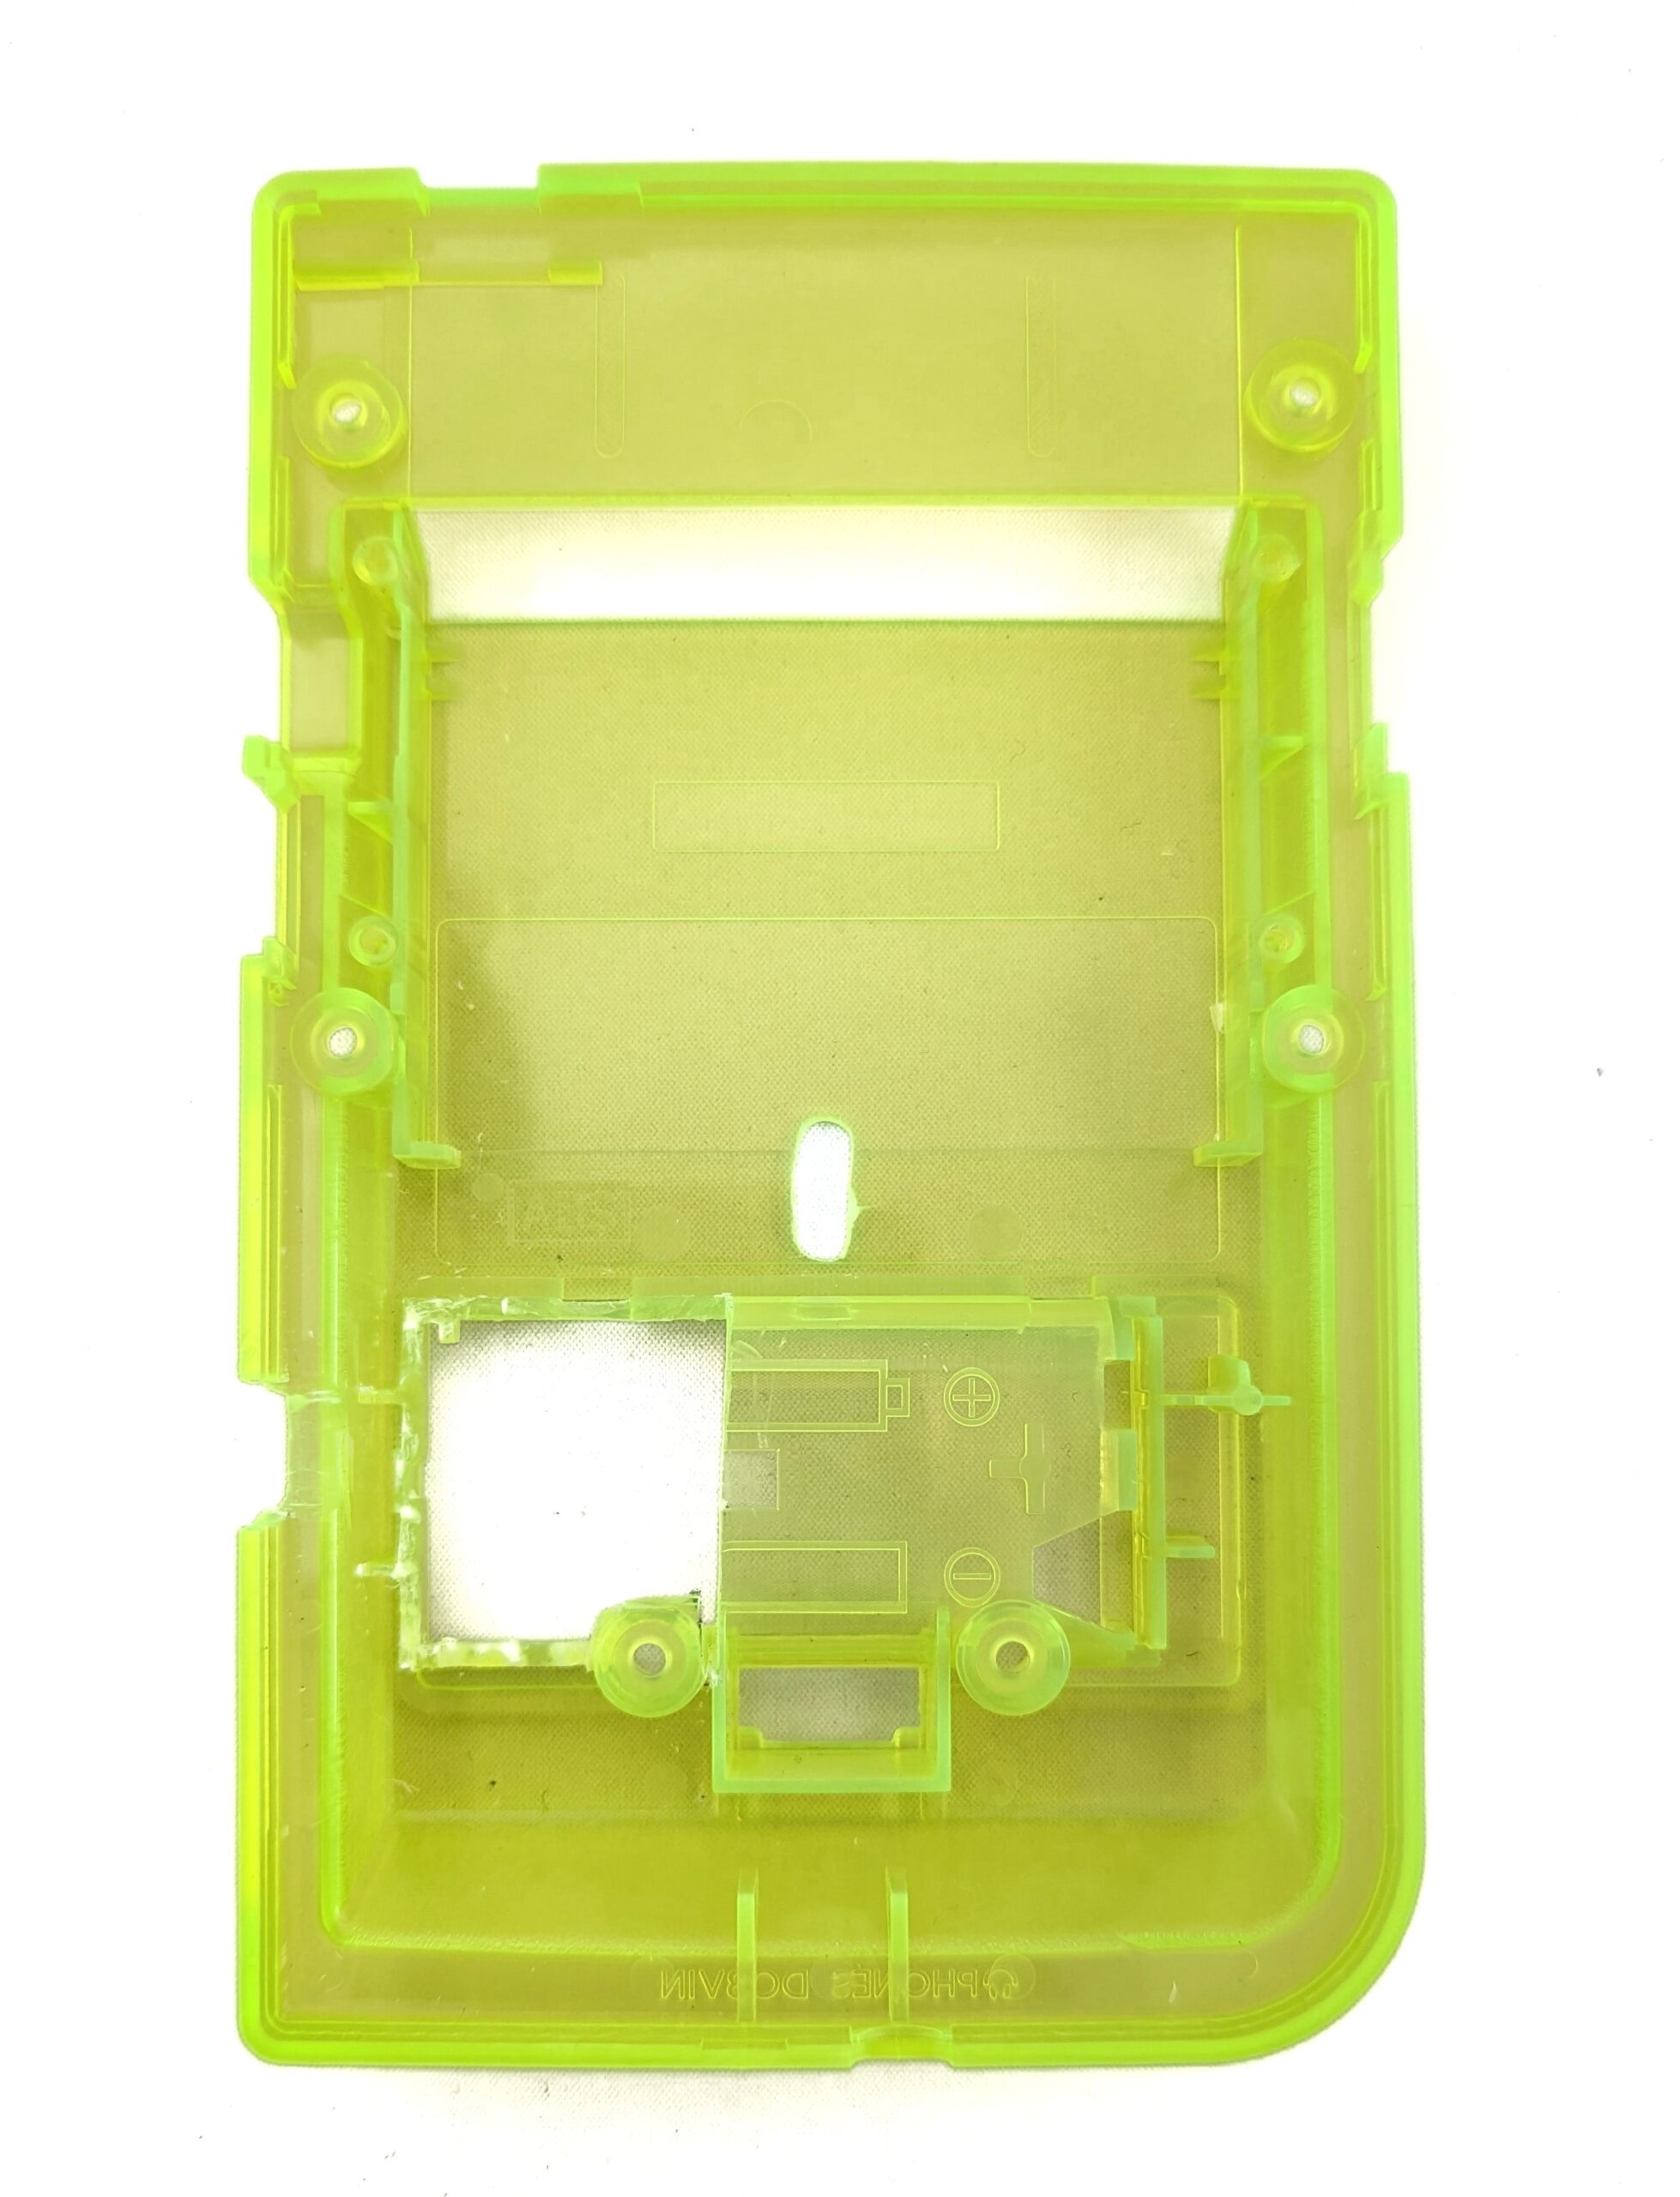 The back of a game boy pocket shell with a hole cut in the battery case